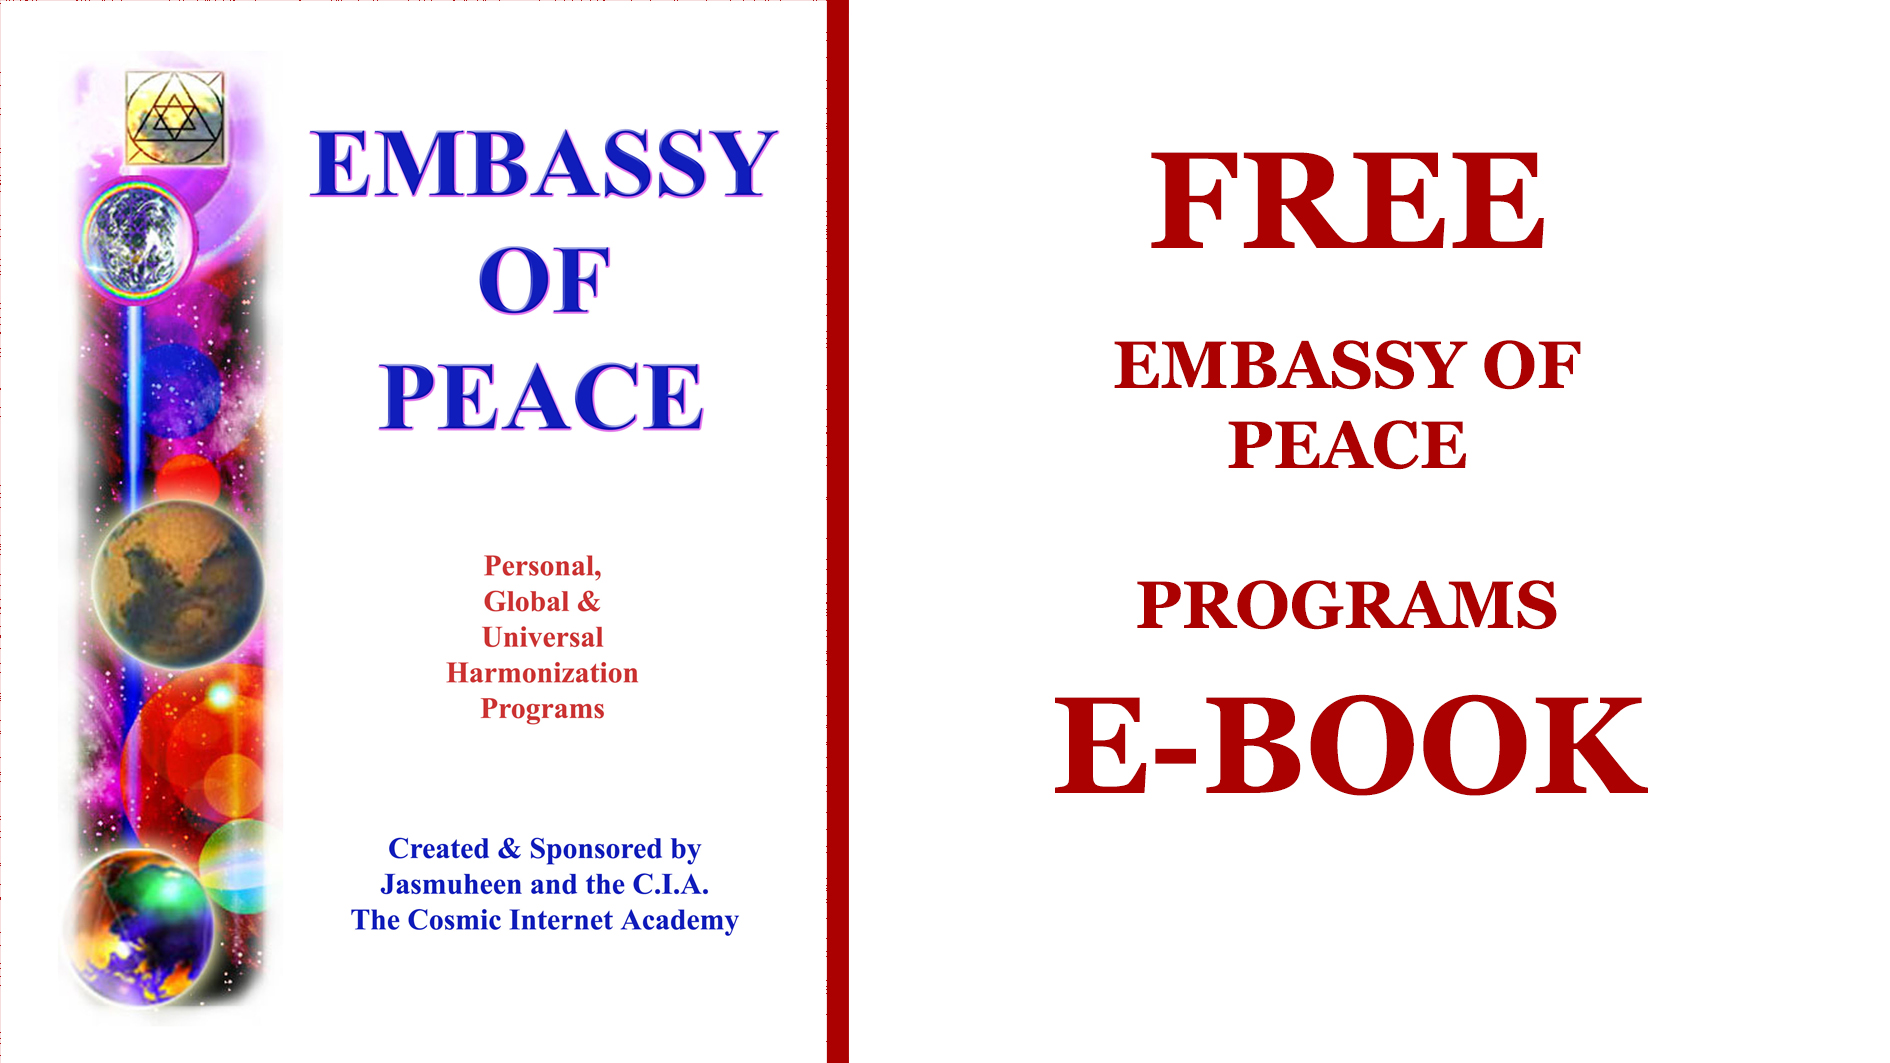 Our free EMBASSY OF PEACE manual